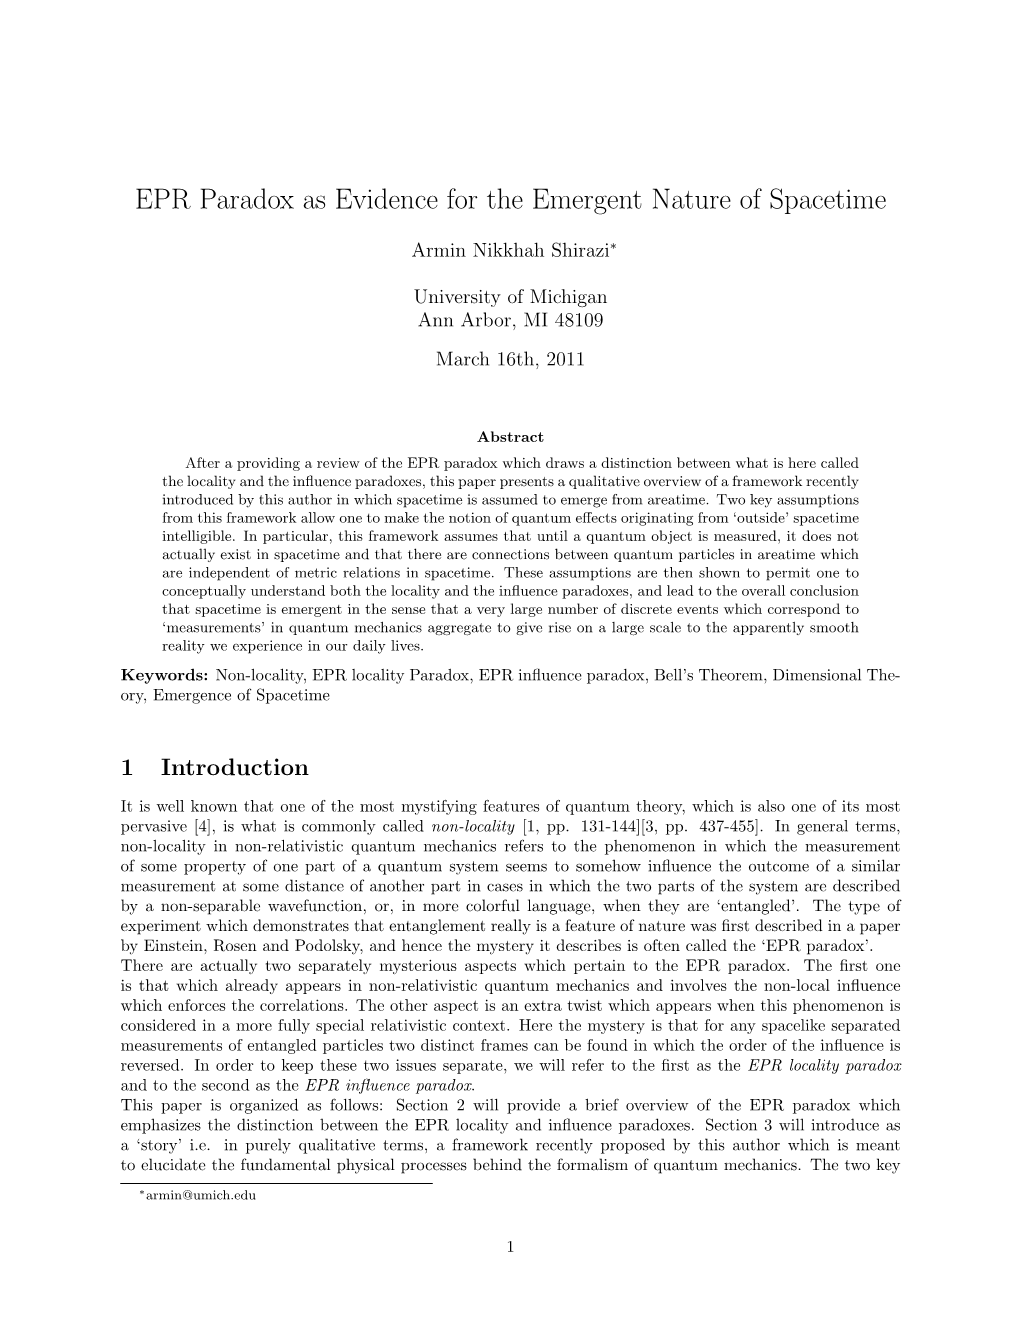 EPR Paradox As Evidence for the Emergent Nature of Spacetime